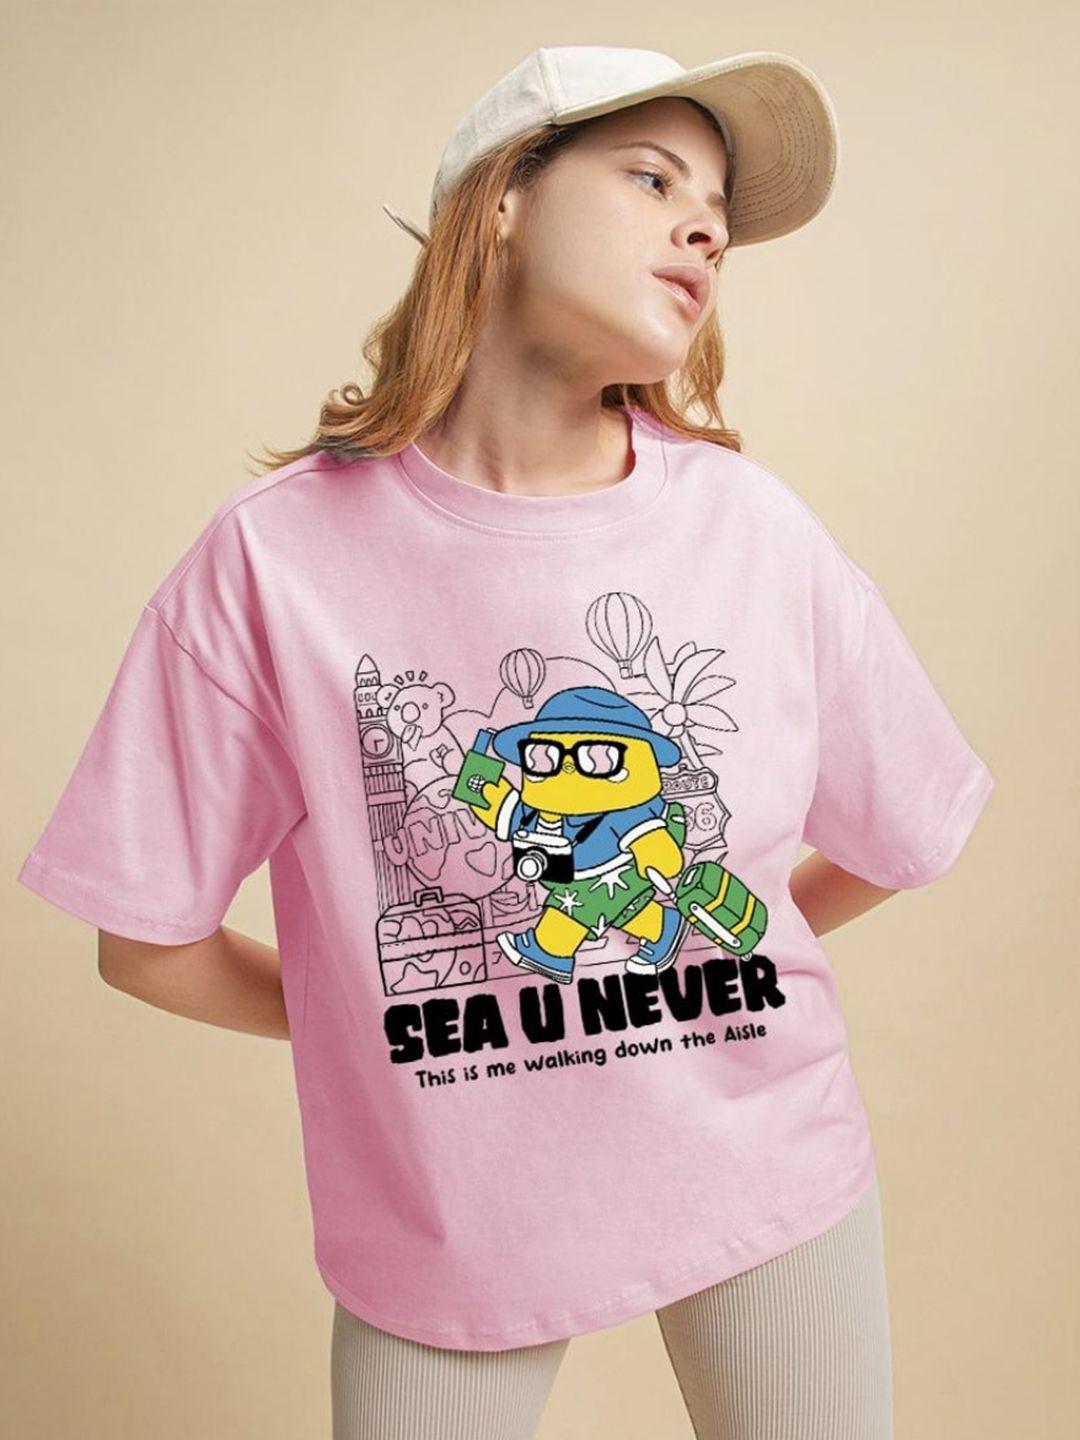 bewakoof-pink-graphic-printed-cotton-oversized-fit-t-shirt